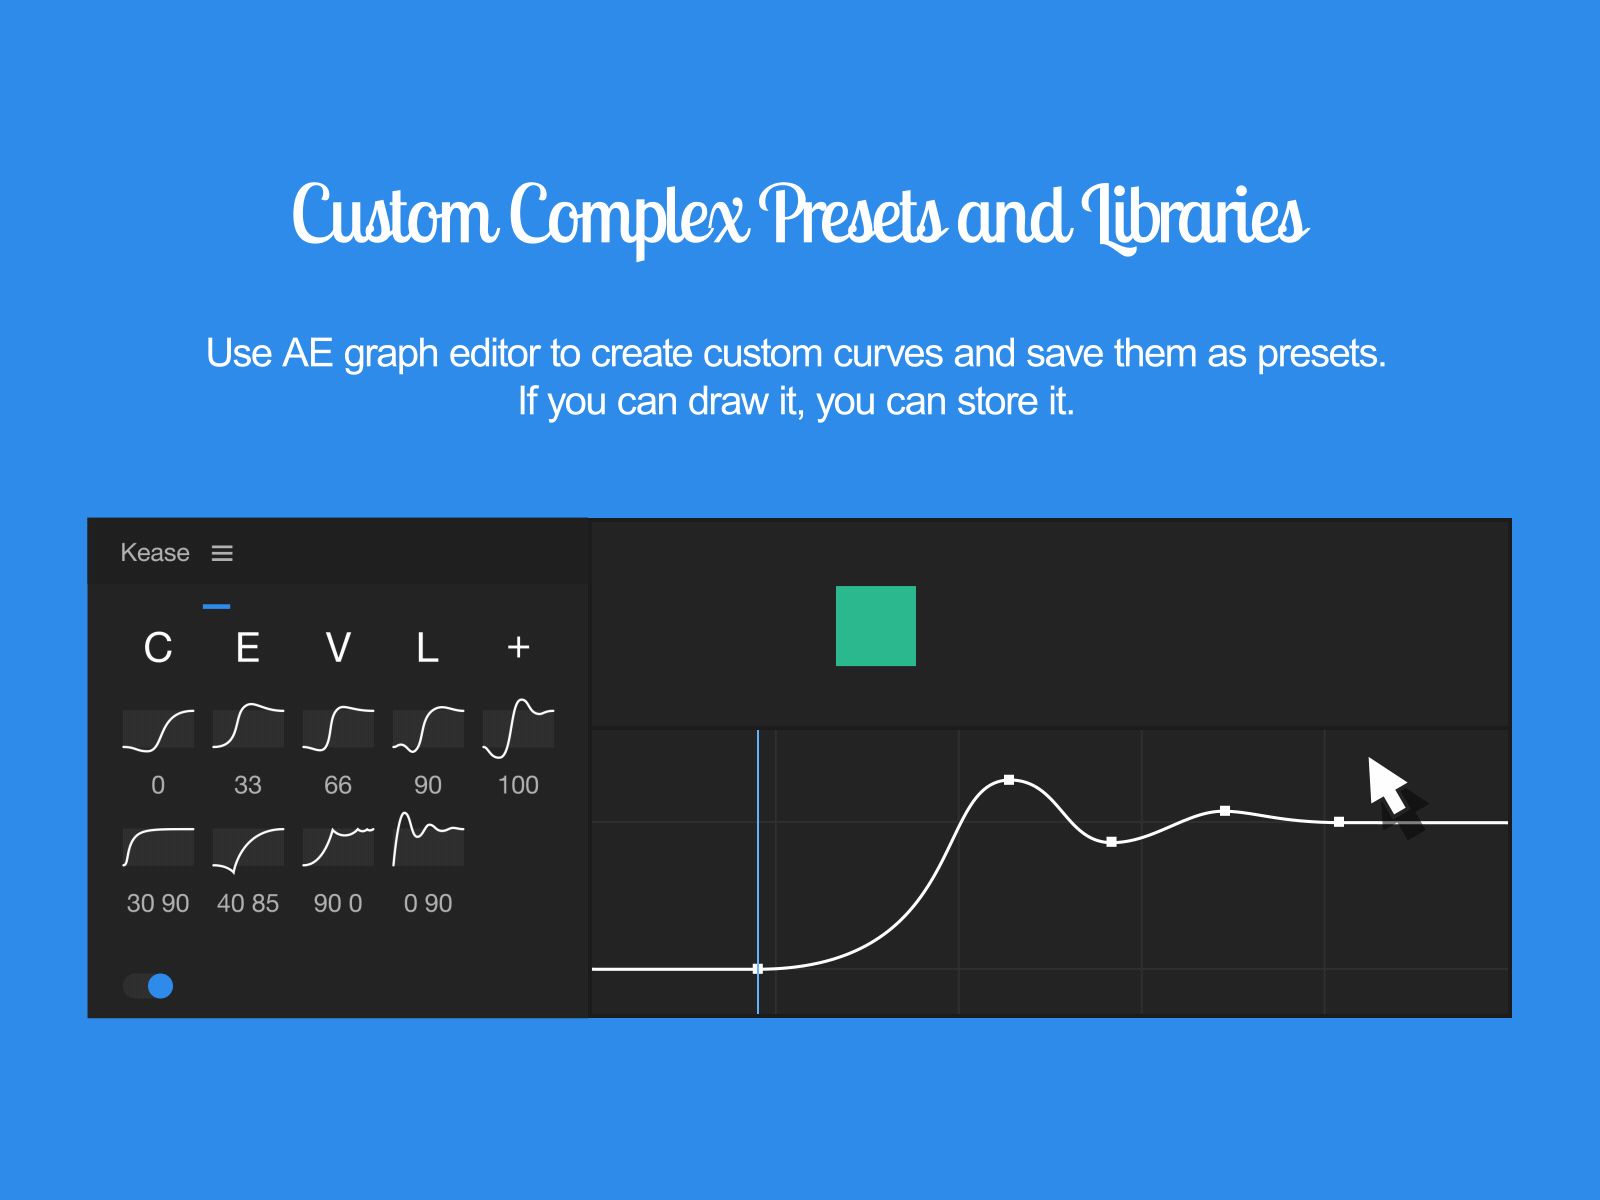 Kease - a script for After Effects - Custom Complex Presets